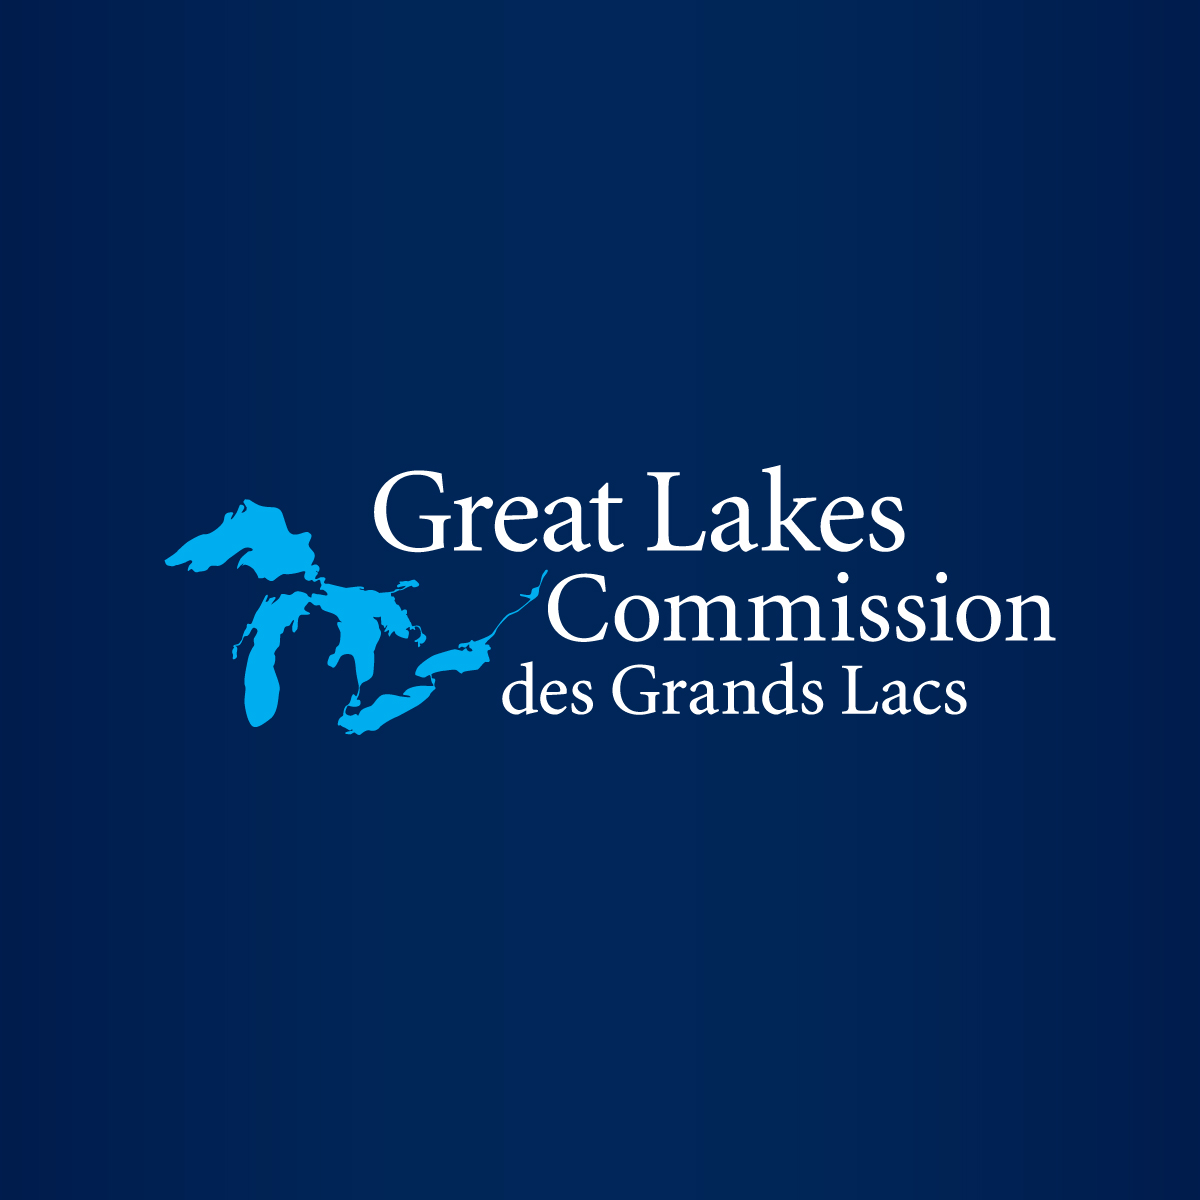 great lakes region is a climate haven webinar panel upcoming